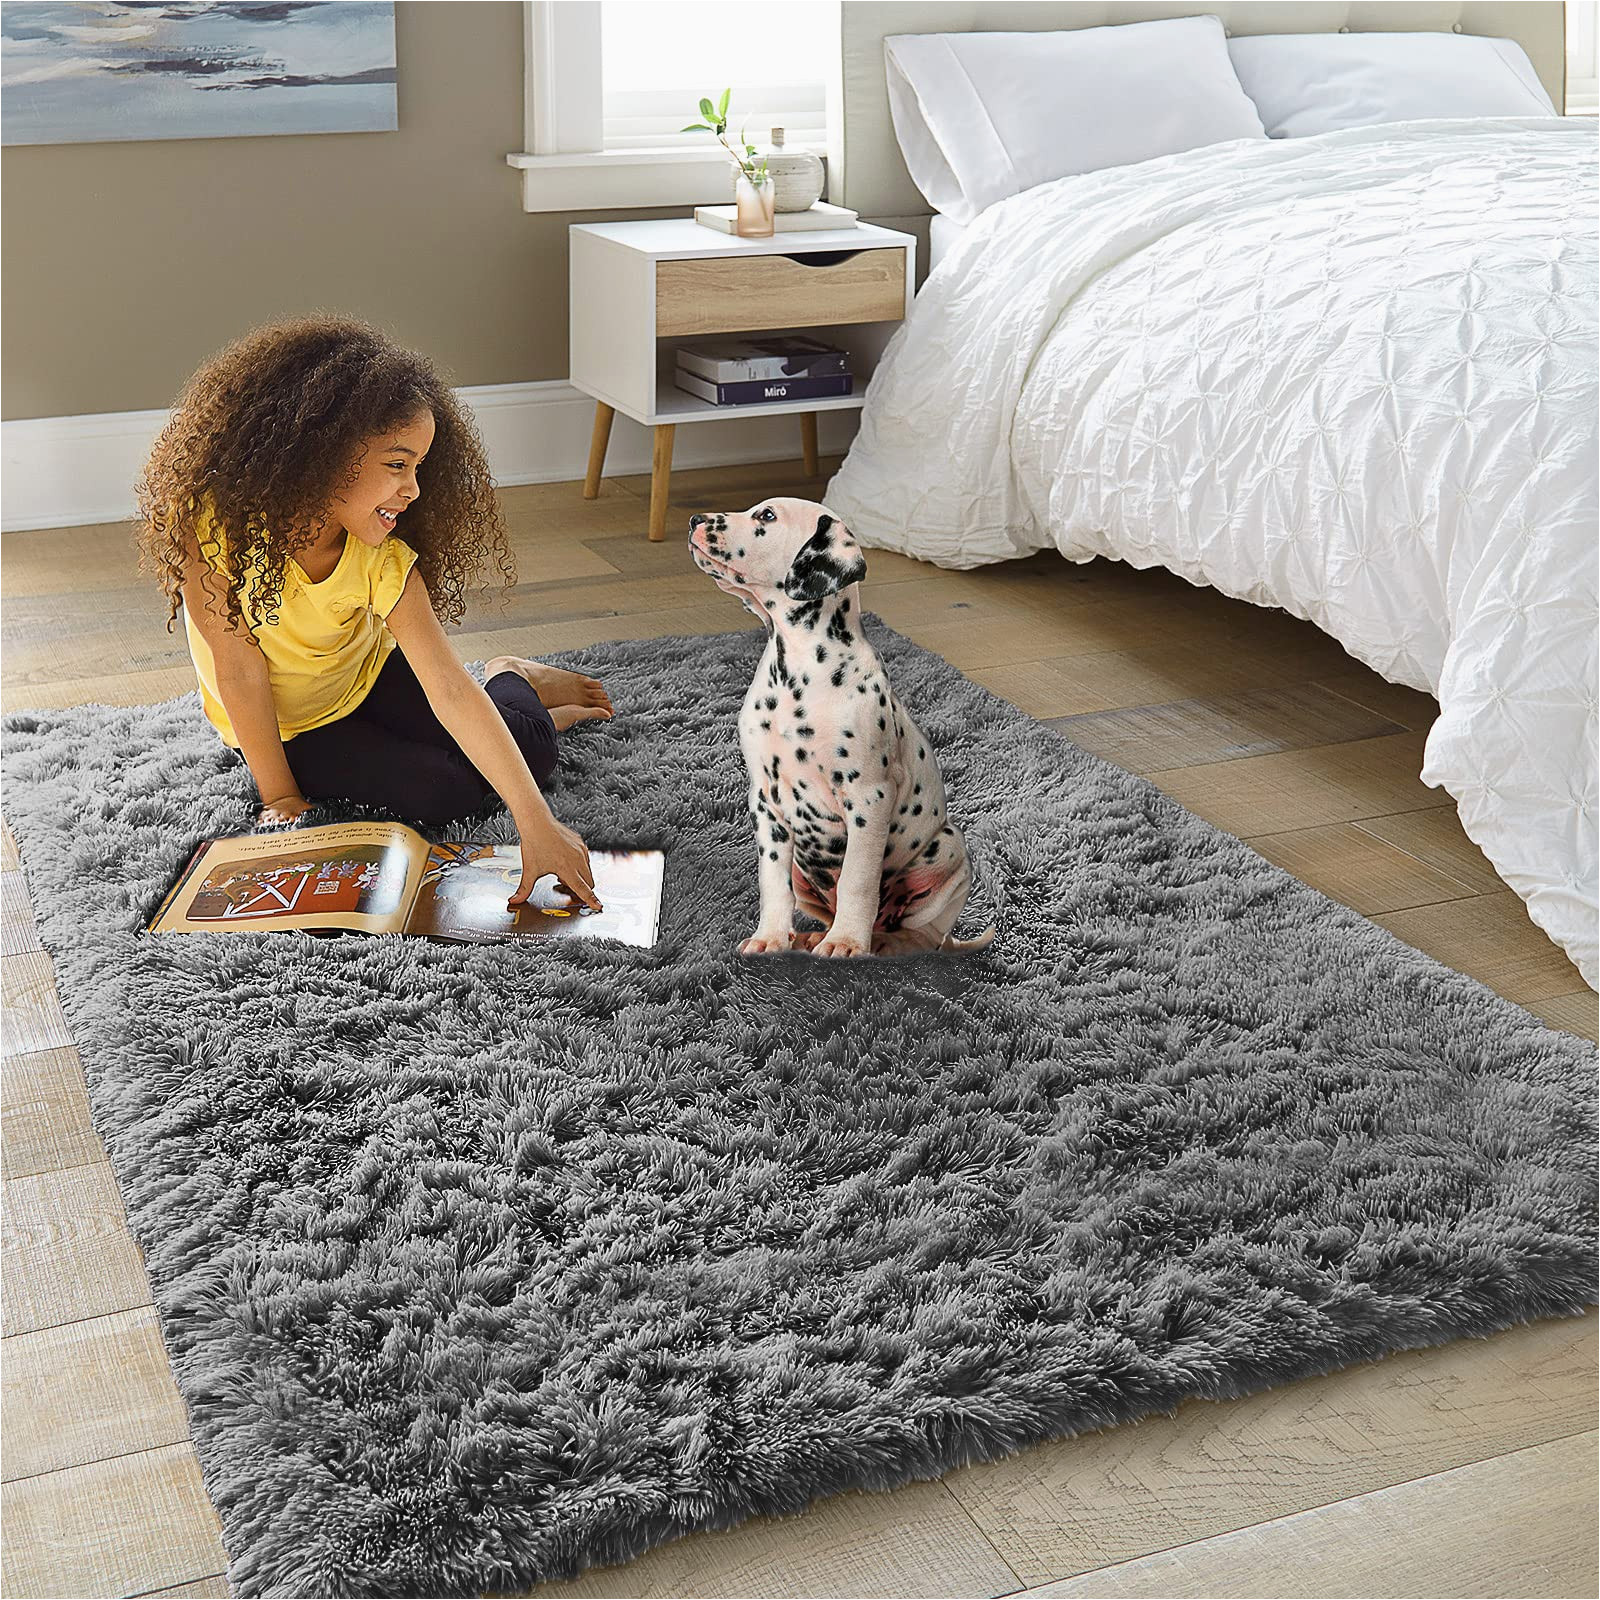 Cheap 3 X 5 area Rugs Ophanie Machine Washable 3 X 5 Feet Rugs for Bedroom, Fluffy Shaggy Bedside Floor Dorm Grey area Rug, soft Gray Fuzzy Non-slip Indoor Room Carpet for …